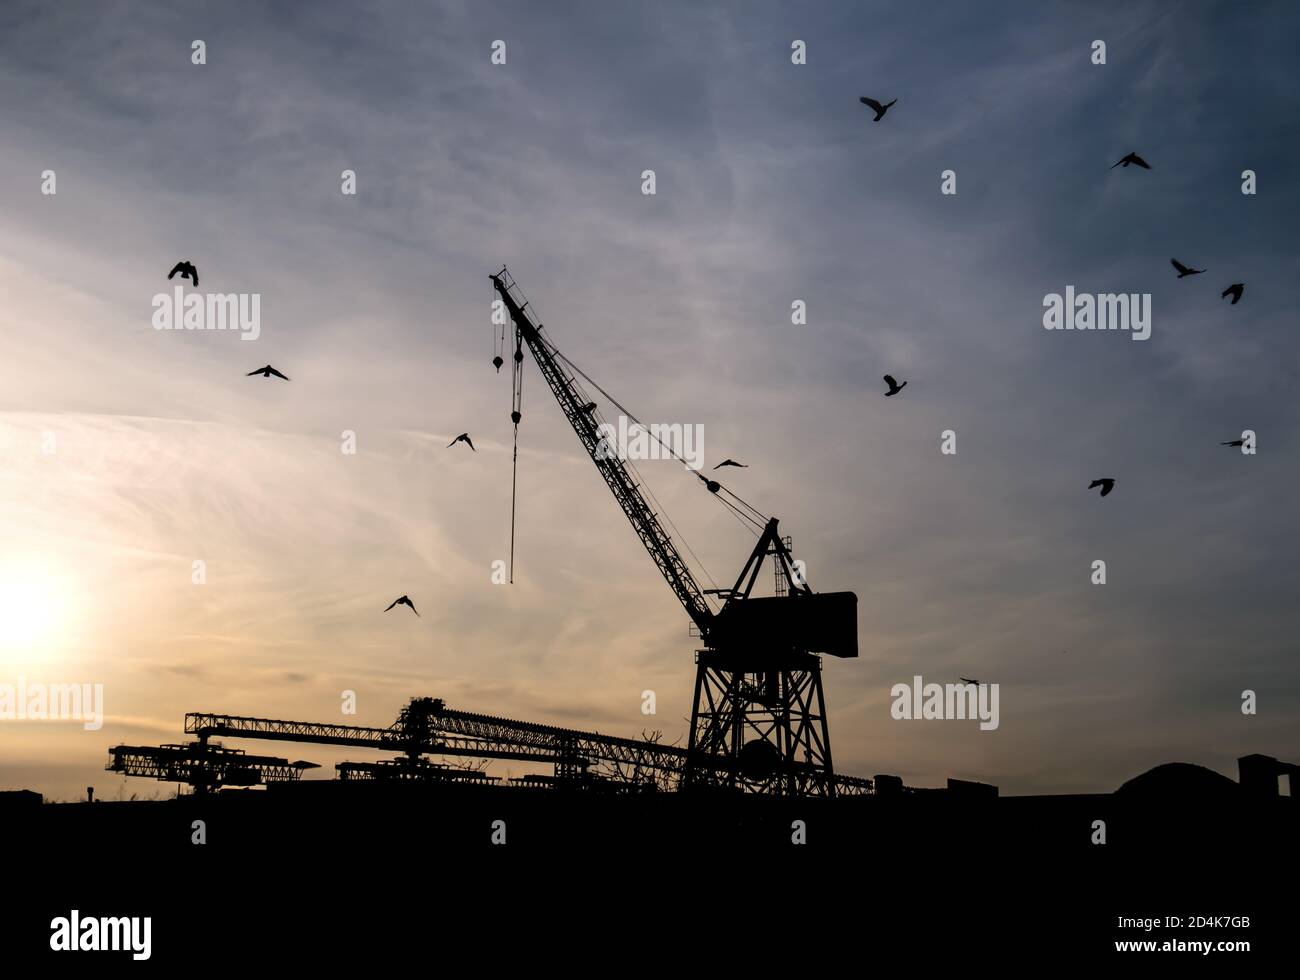 Industrial crane and buildings silhouetted at sunset. Many birds in the sky. Location: Sea to sky trail, North Vancouver, BC, Canada Stock Photo